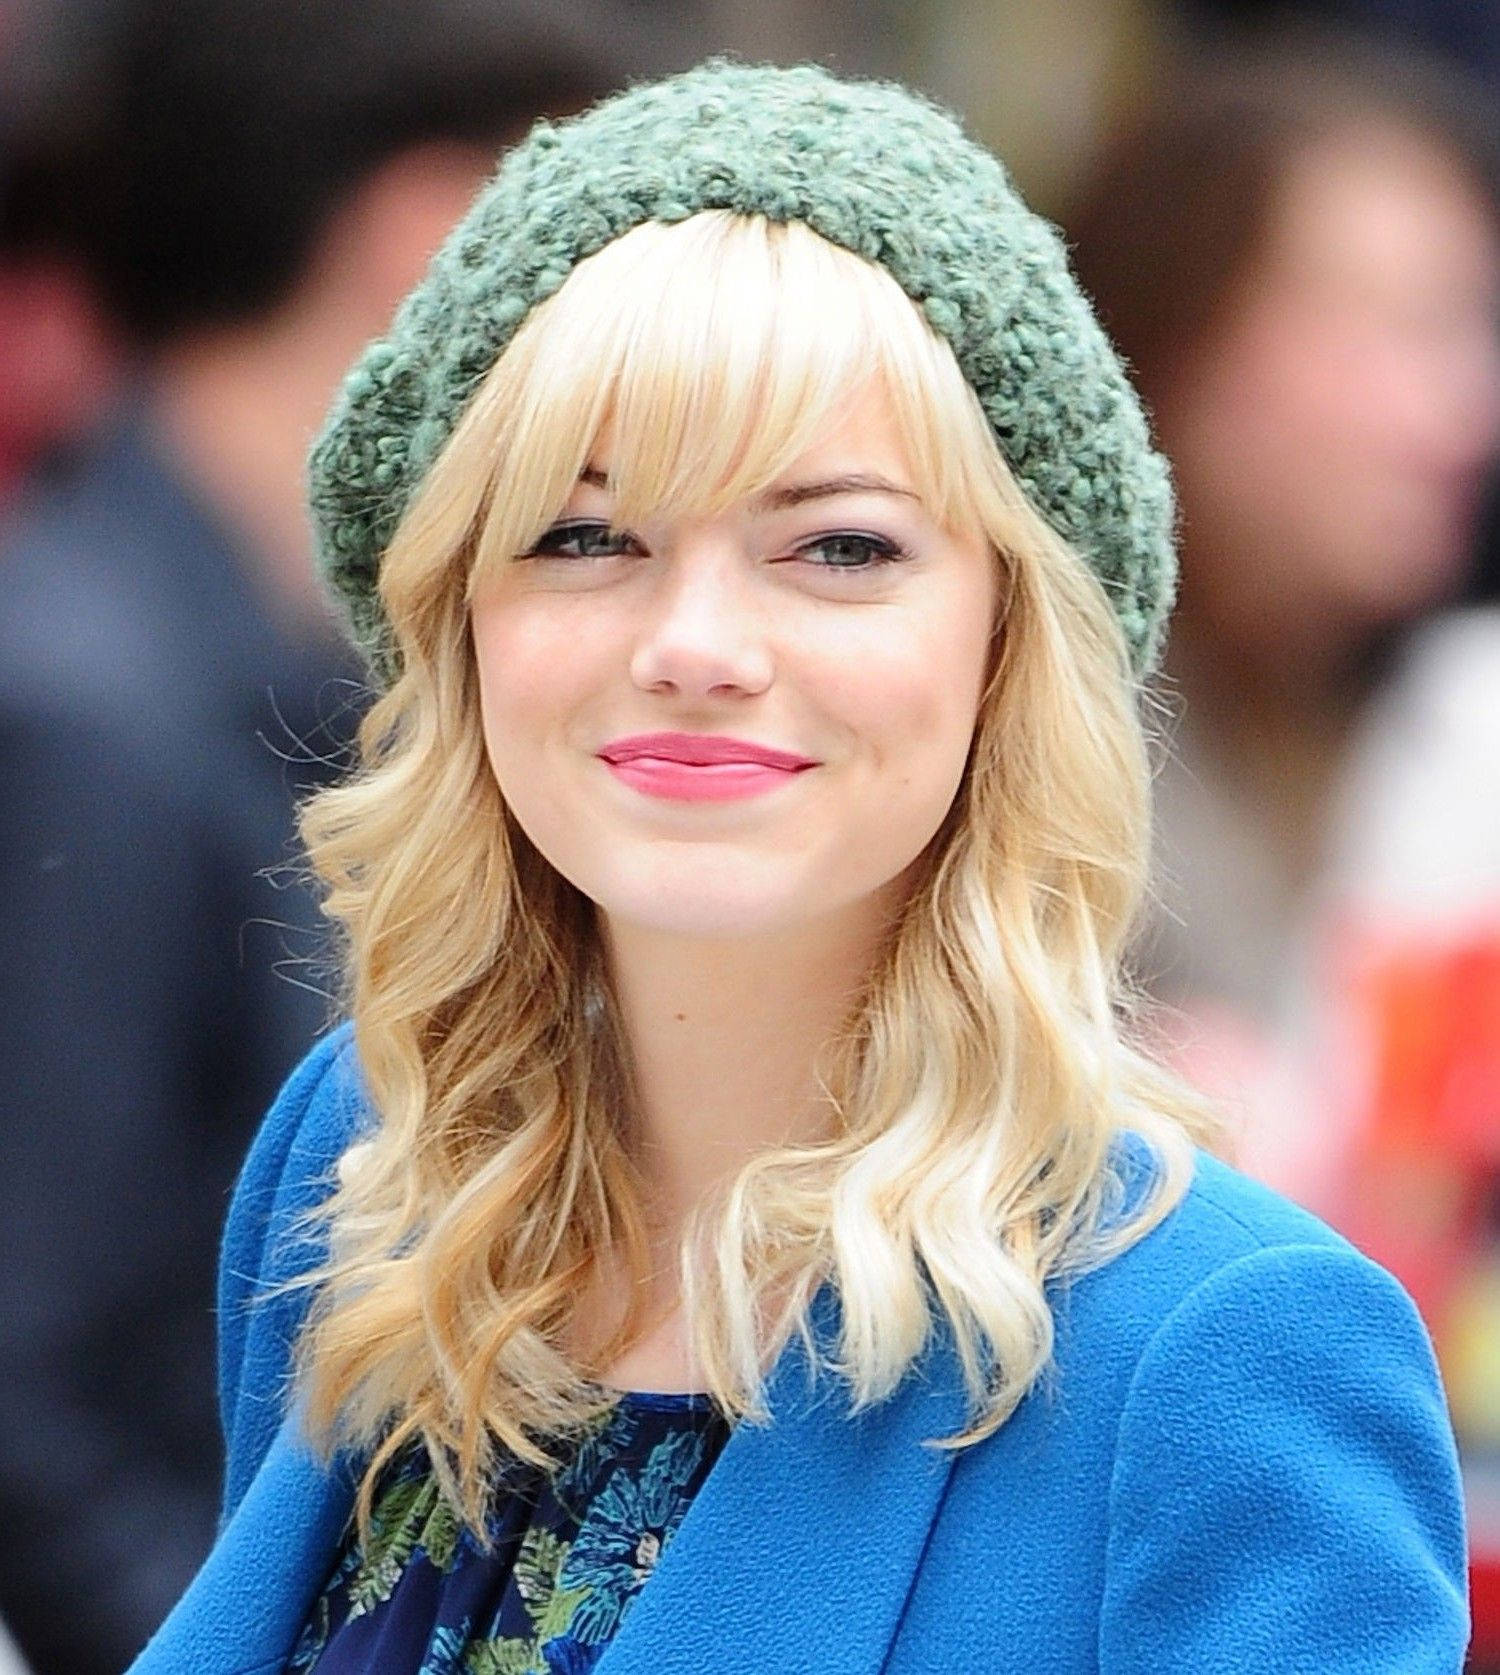 Emma Stone exudes confidence in a classic military inspired look. Wallpaper